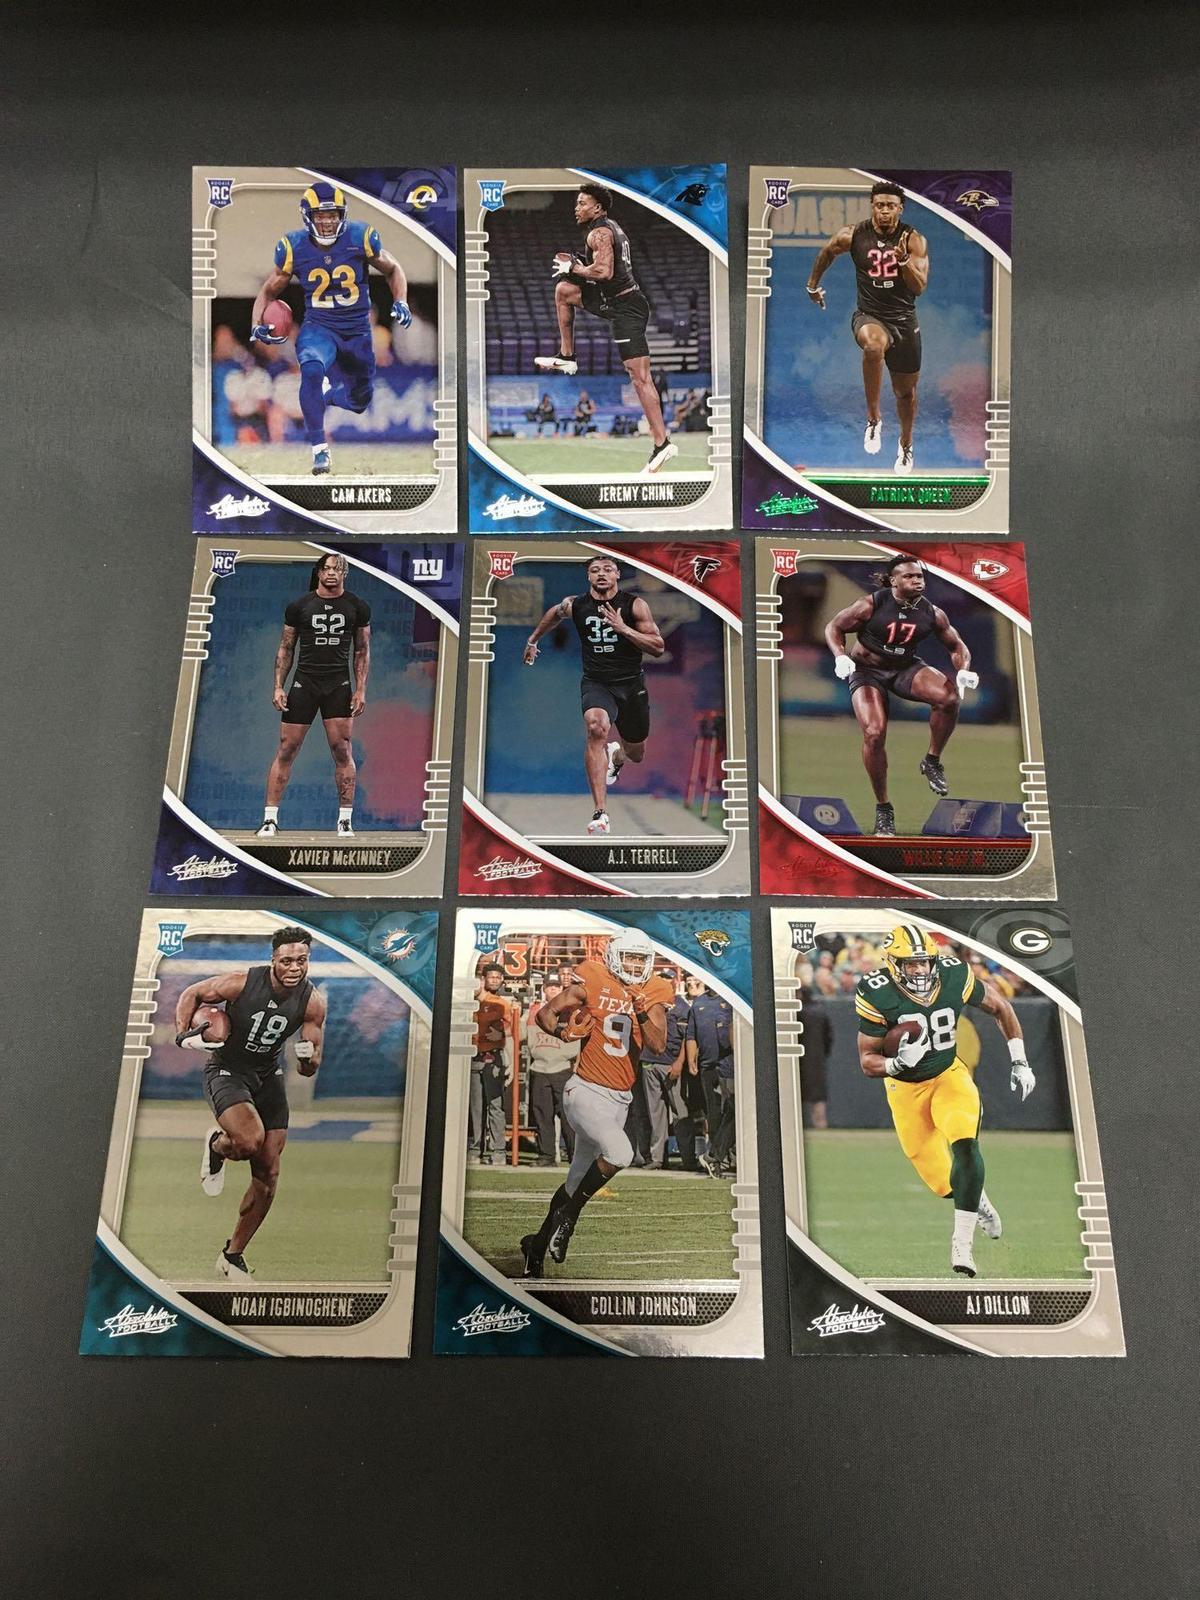 9 Card Lot of FOOTBALL ROOKIE CARDS - Mostly from Newer Sets with Future Stars & More!